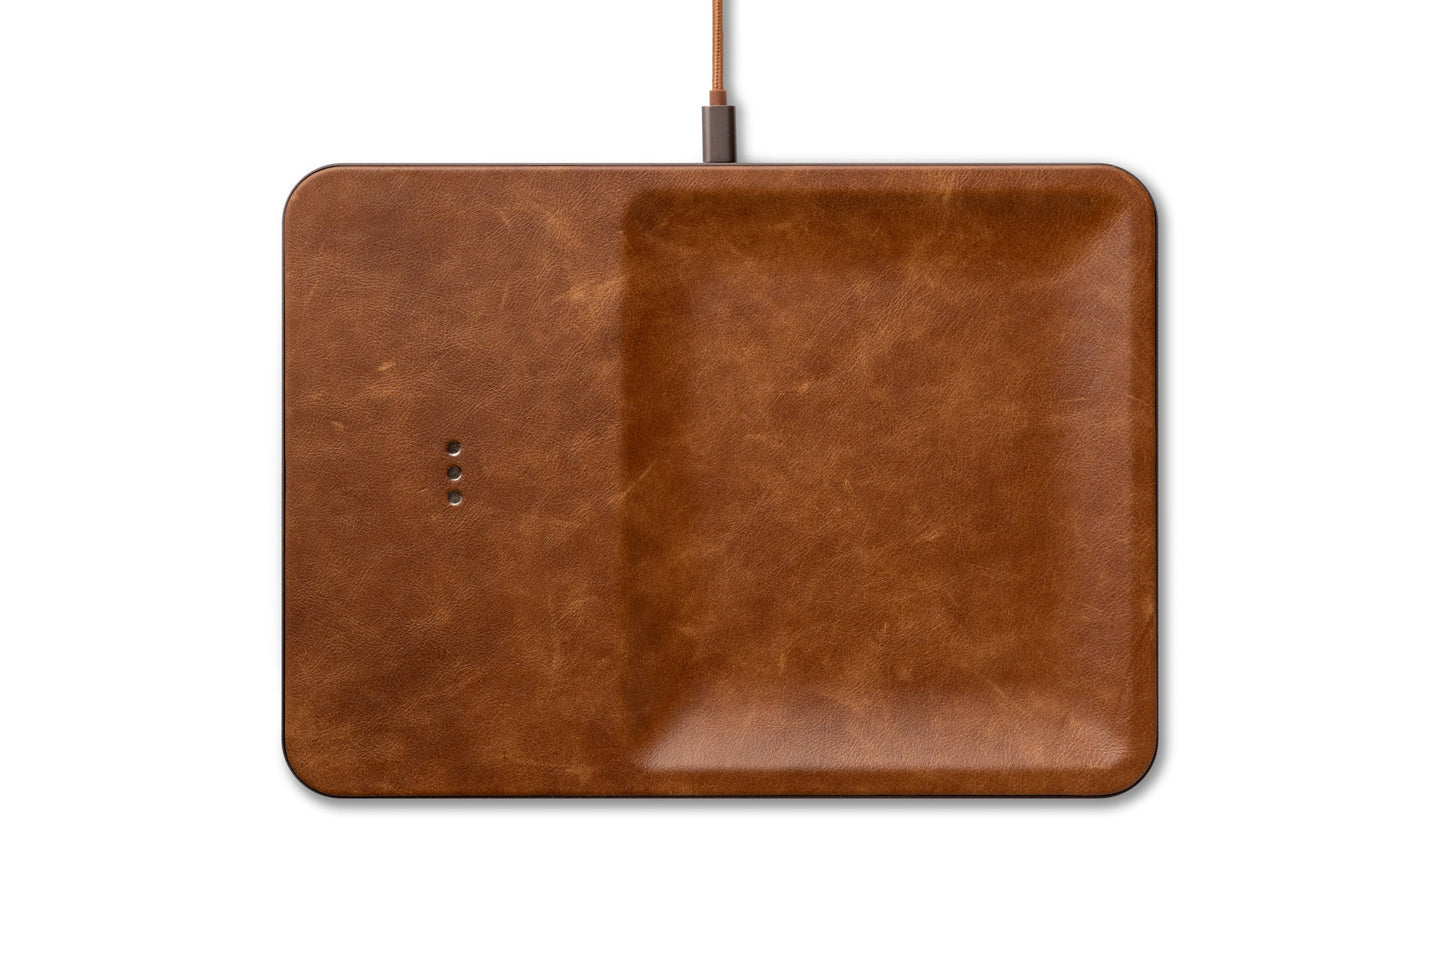 CATCH:3 - Classics Leather Wireless Charger with Valet Tray: Black